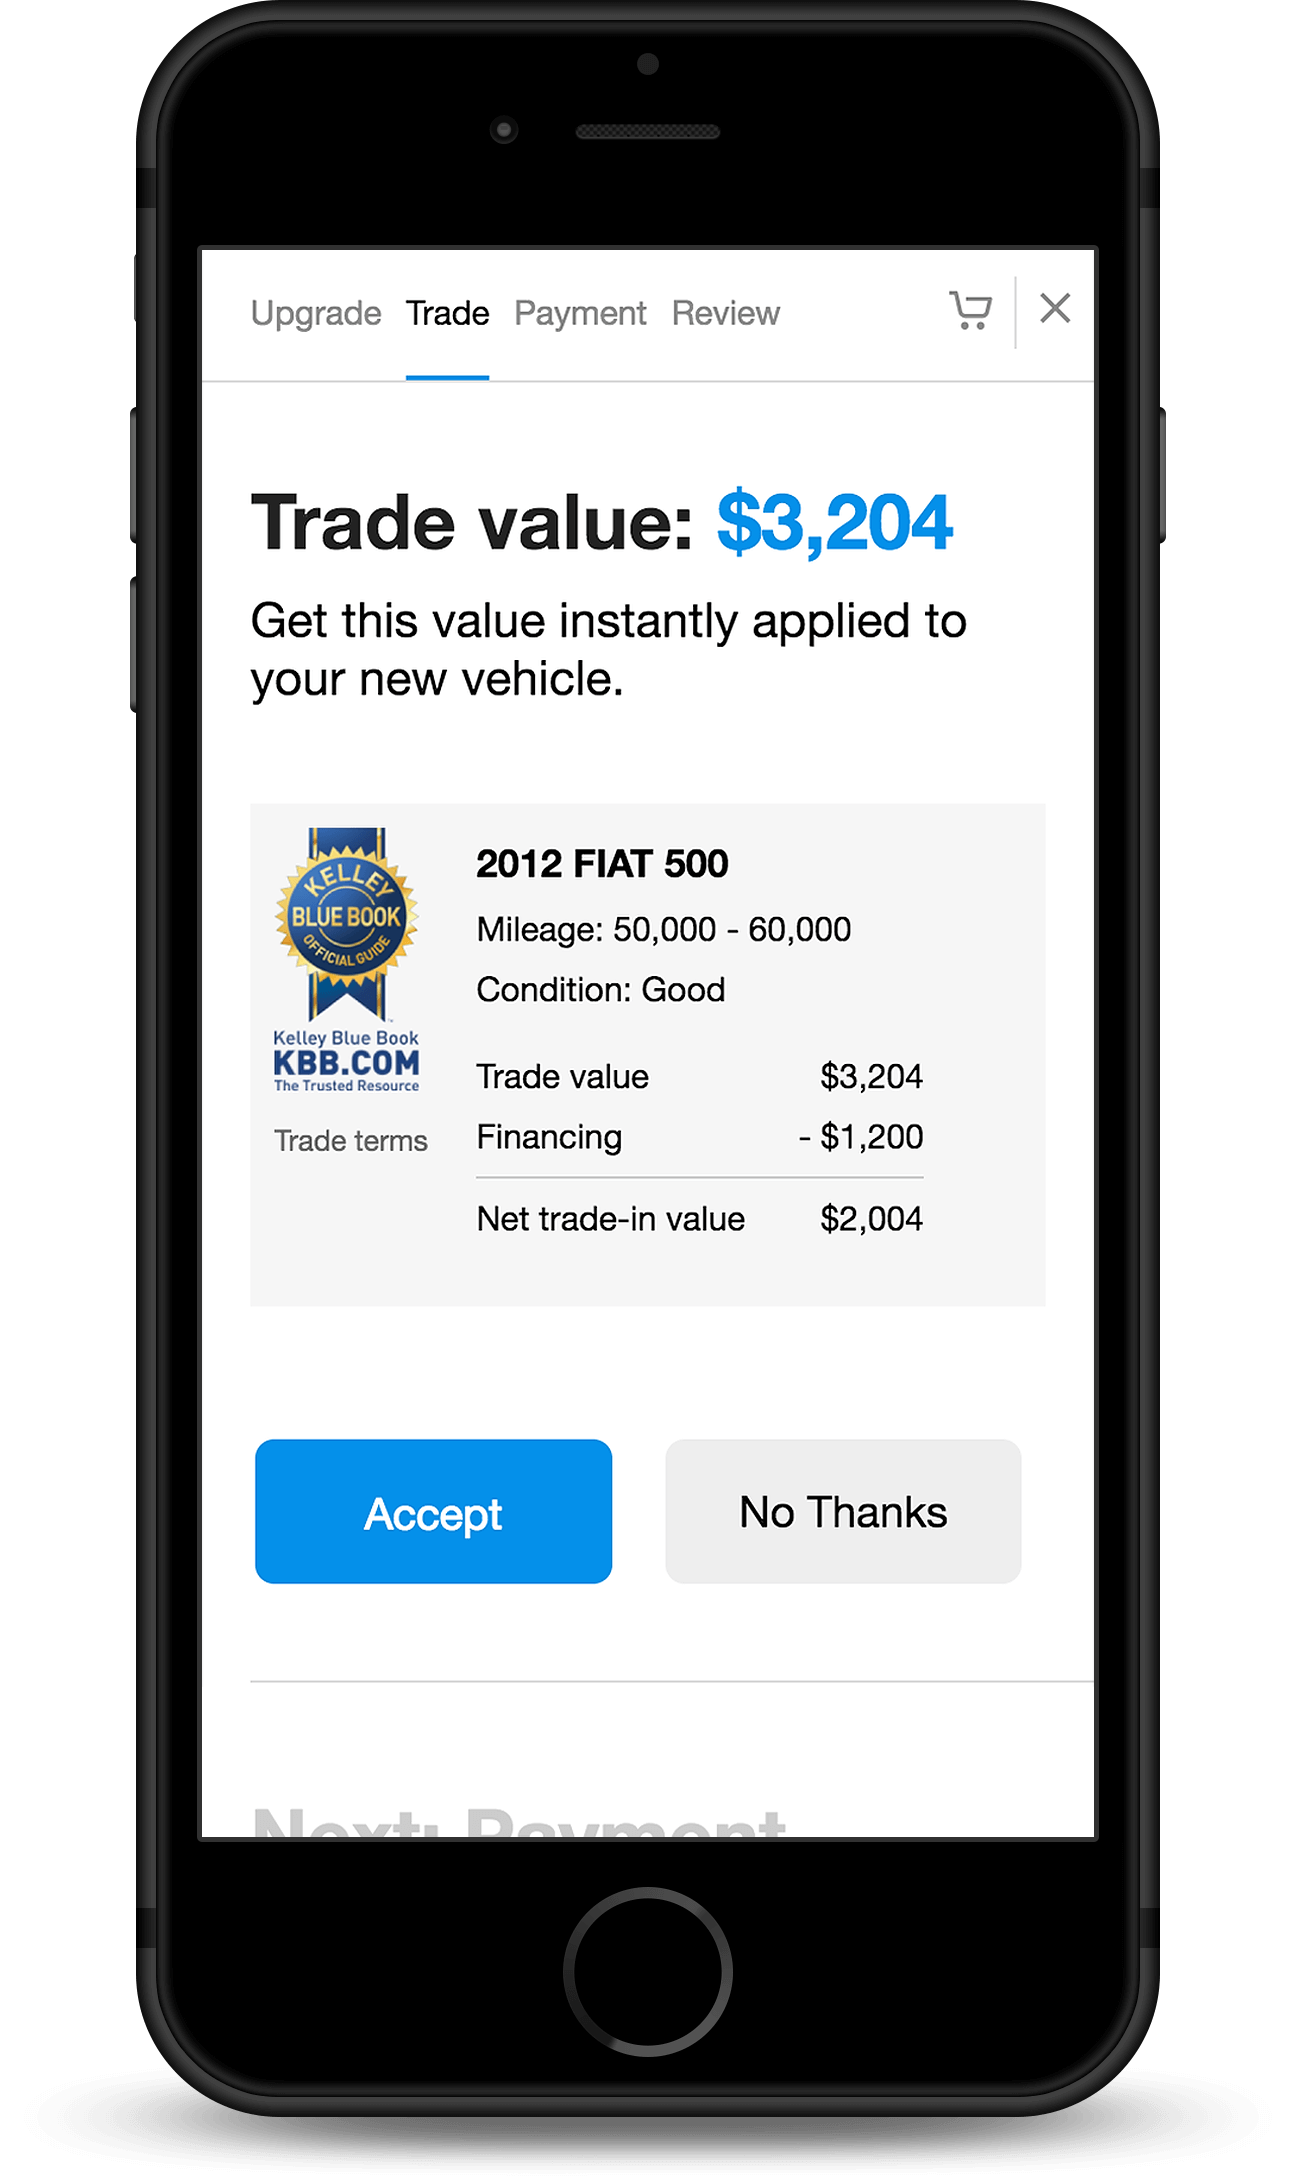 Enter Your Trade-in Information